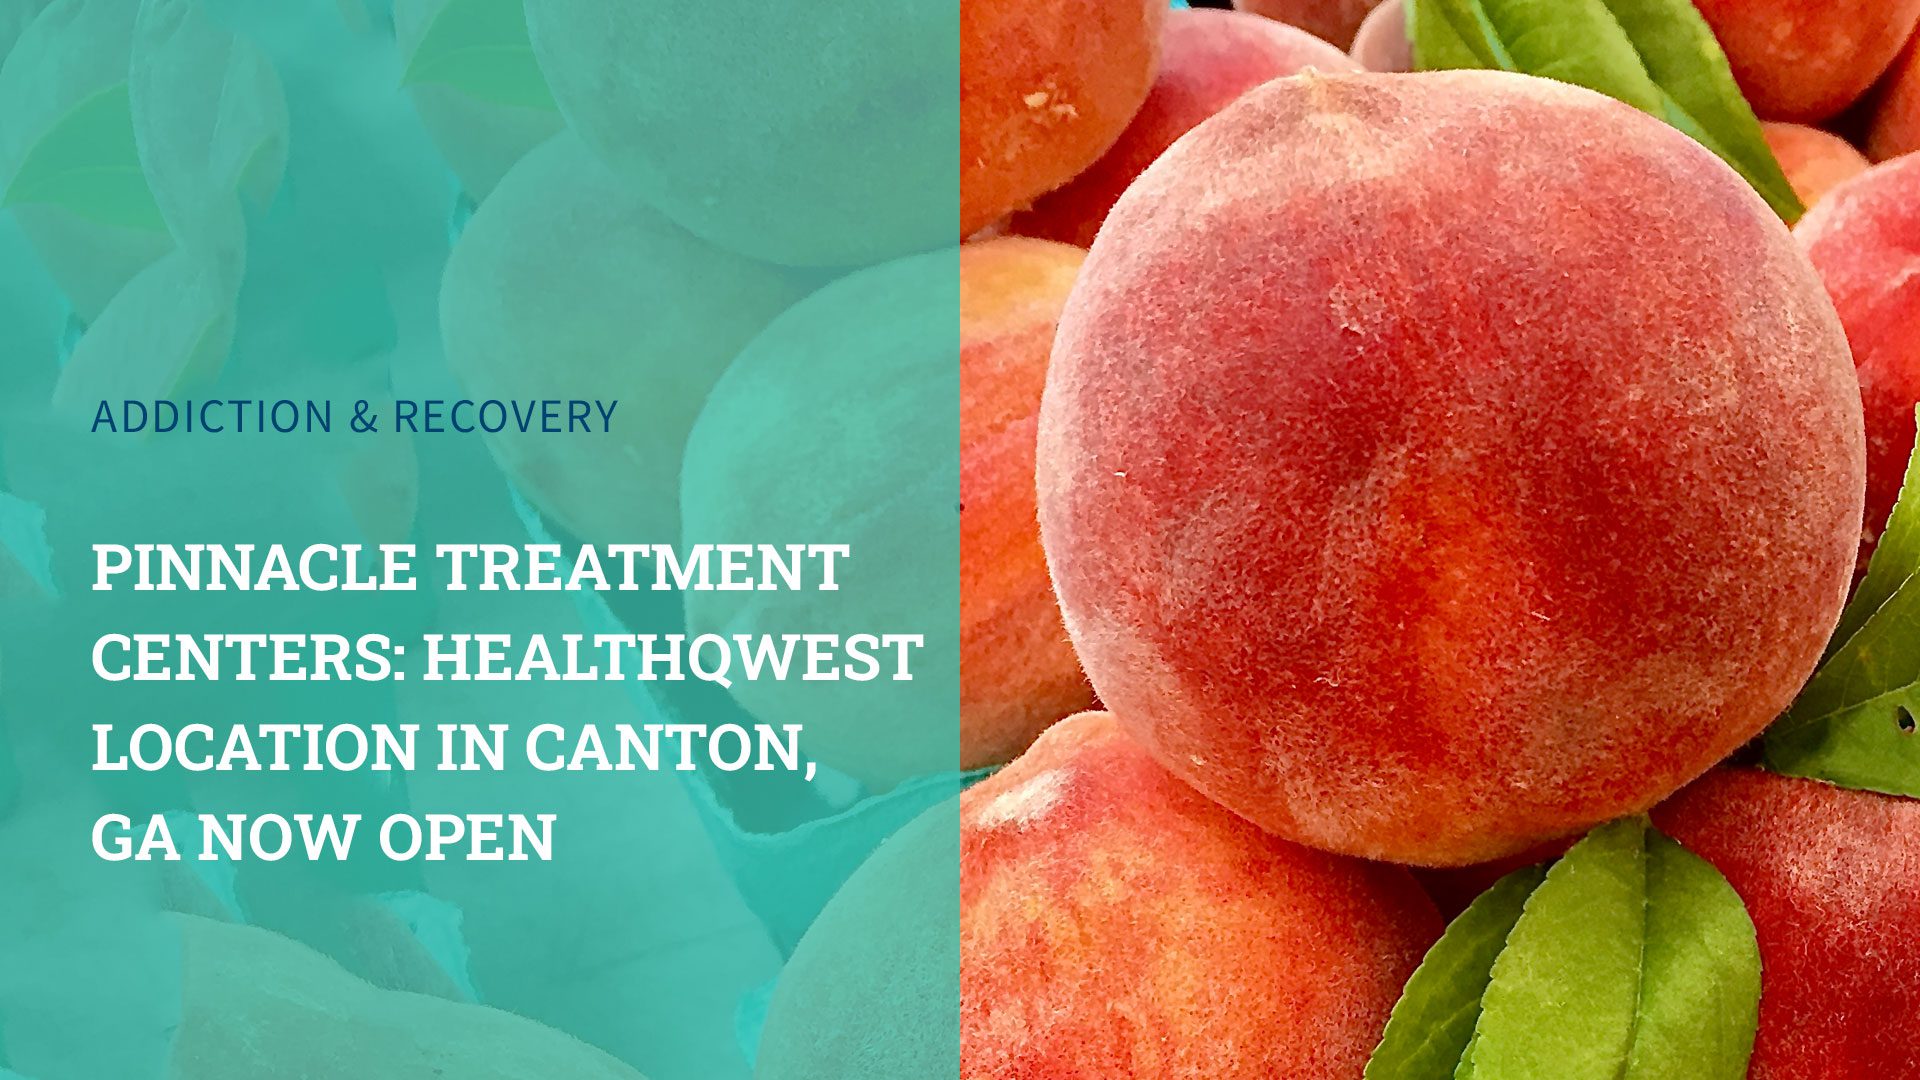 Pinnacle Treatment Centers: HealthQwest Location in Canton, GA Now Open